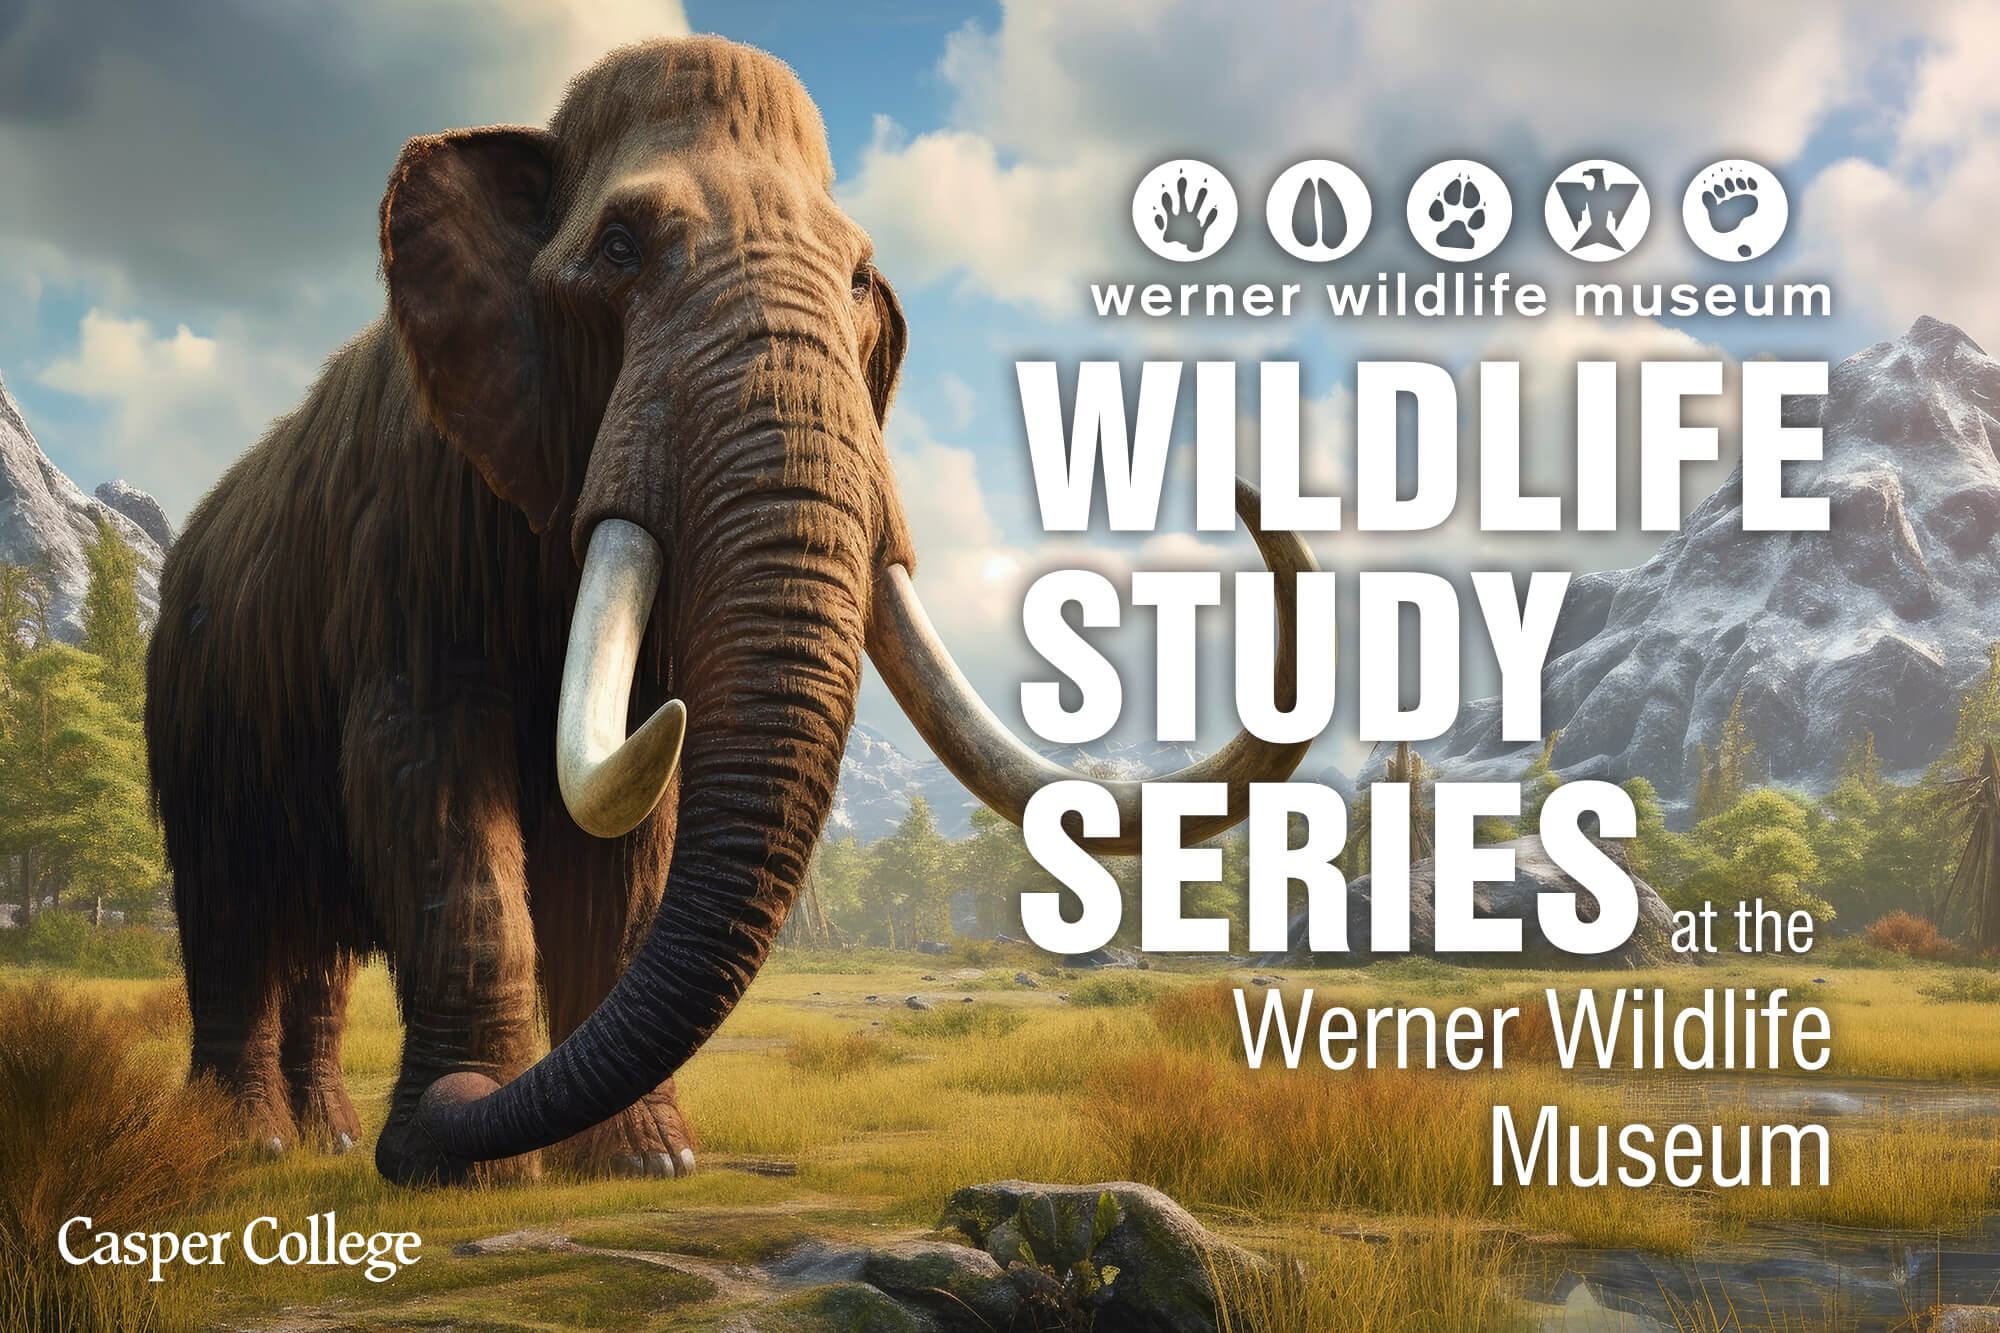 Image for February, March, and April Werner Wildlife Study Series press releases.